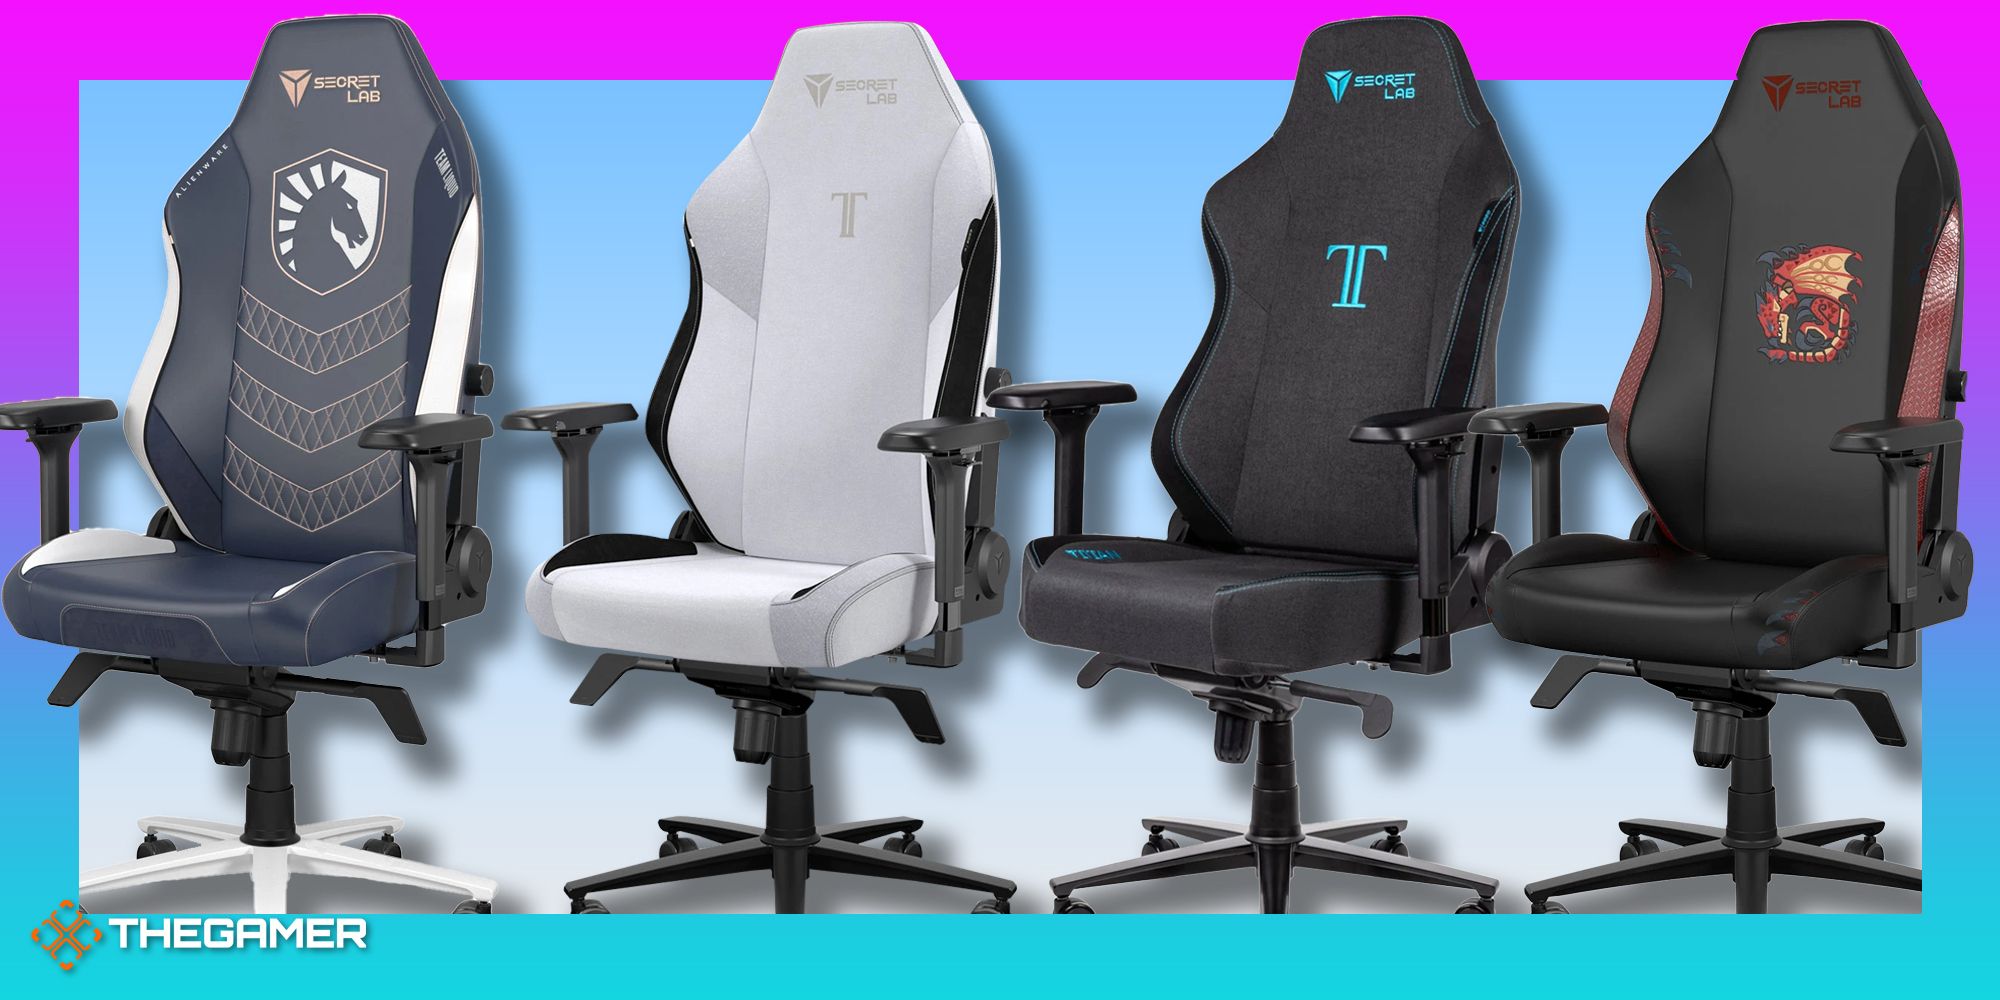 2Deals Guide On Secretlab Gaming Chairs For Black Friday